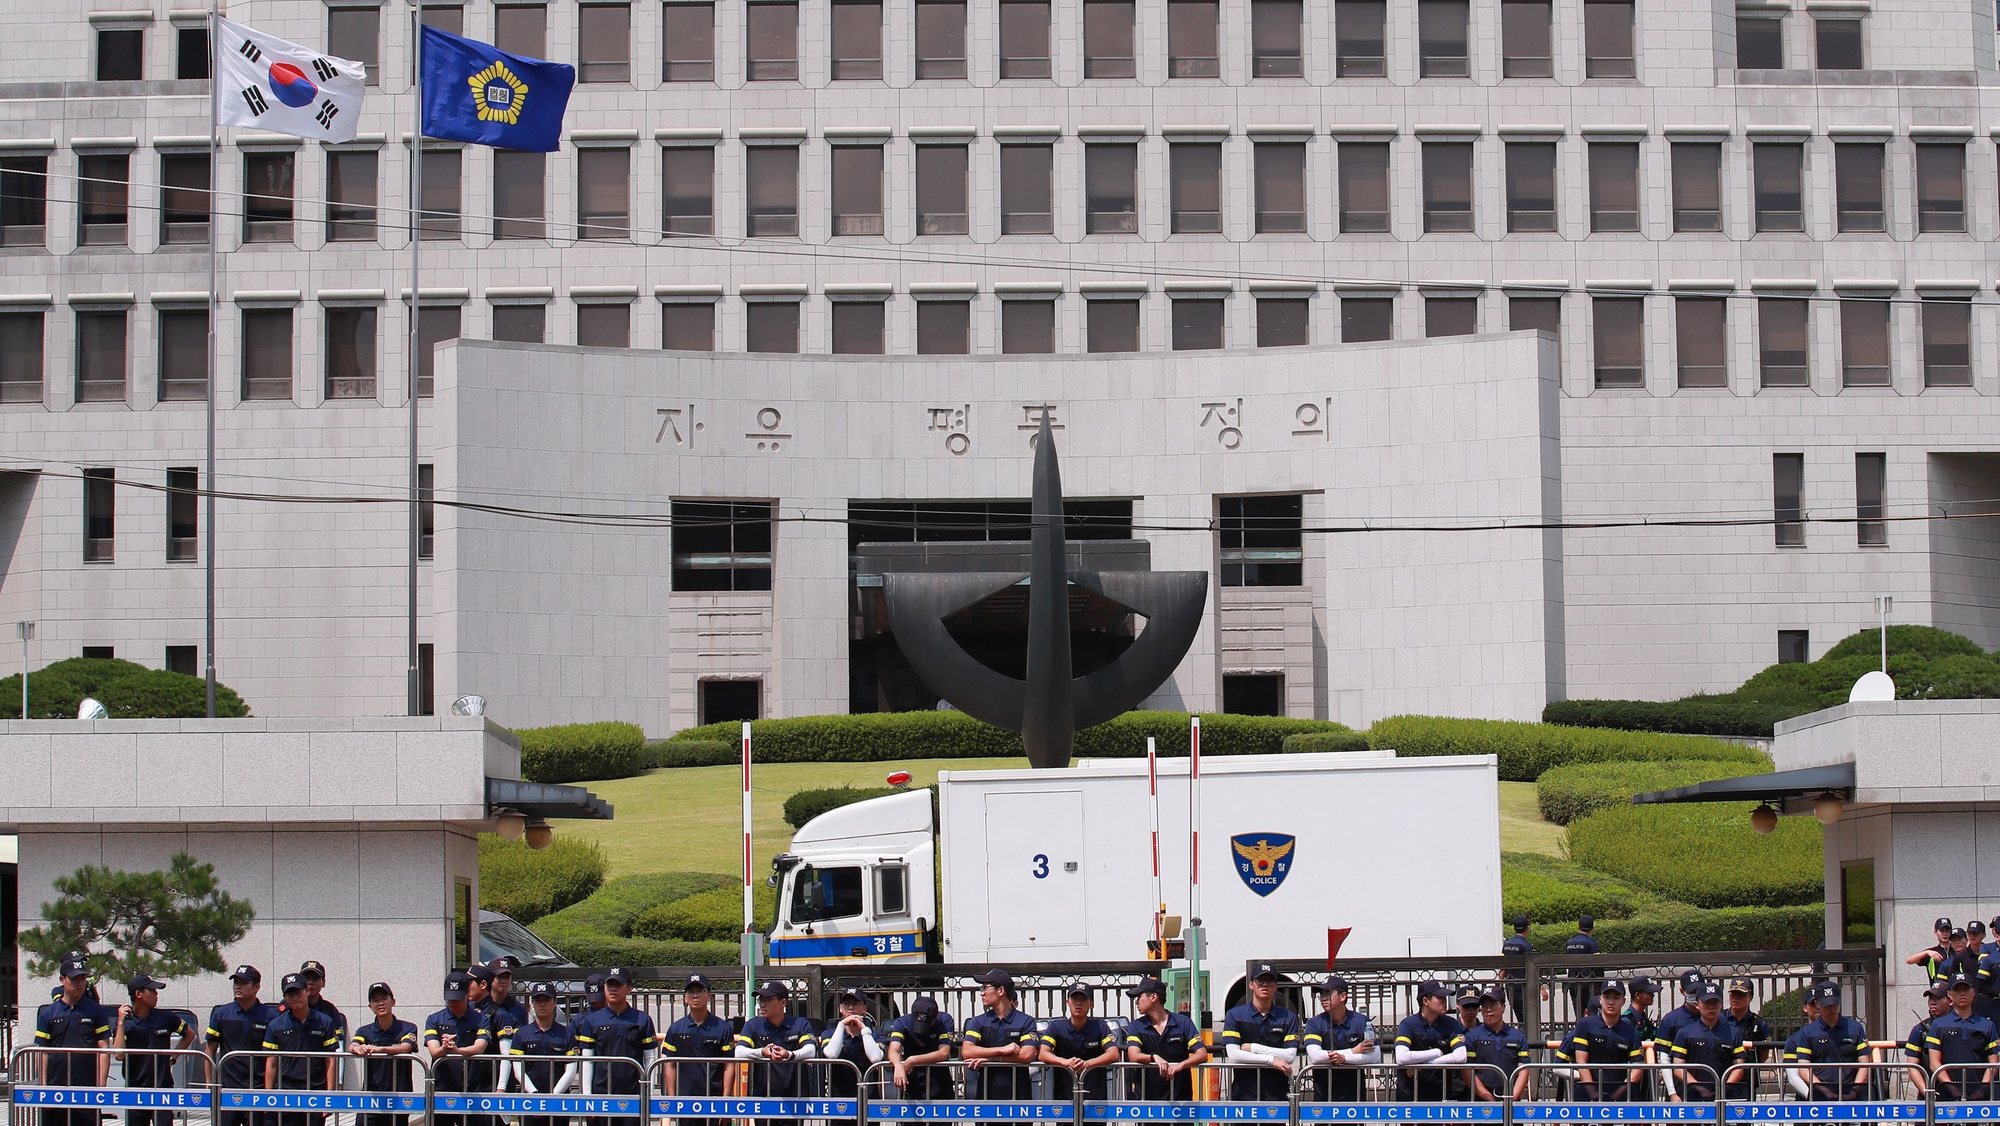 epa07798648 Police forces are deployed in front of the entrance of the Supreme Court in Seoul, South korea, 28 August 2019, one day ahead of a verdict trial of former President Park Geun-hye, her confidante Choi Soon-sil and Samsung Electronics Co. Vice Chairman Lee Jae-yong in a corruption scandal.  EPA/YONHAP SOUTH KOREA OUT